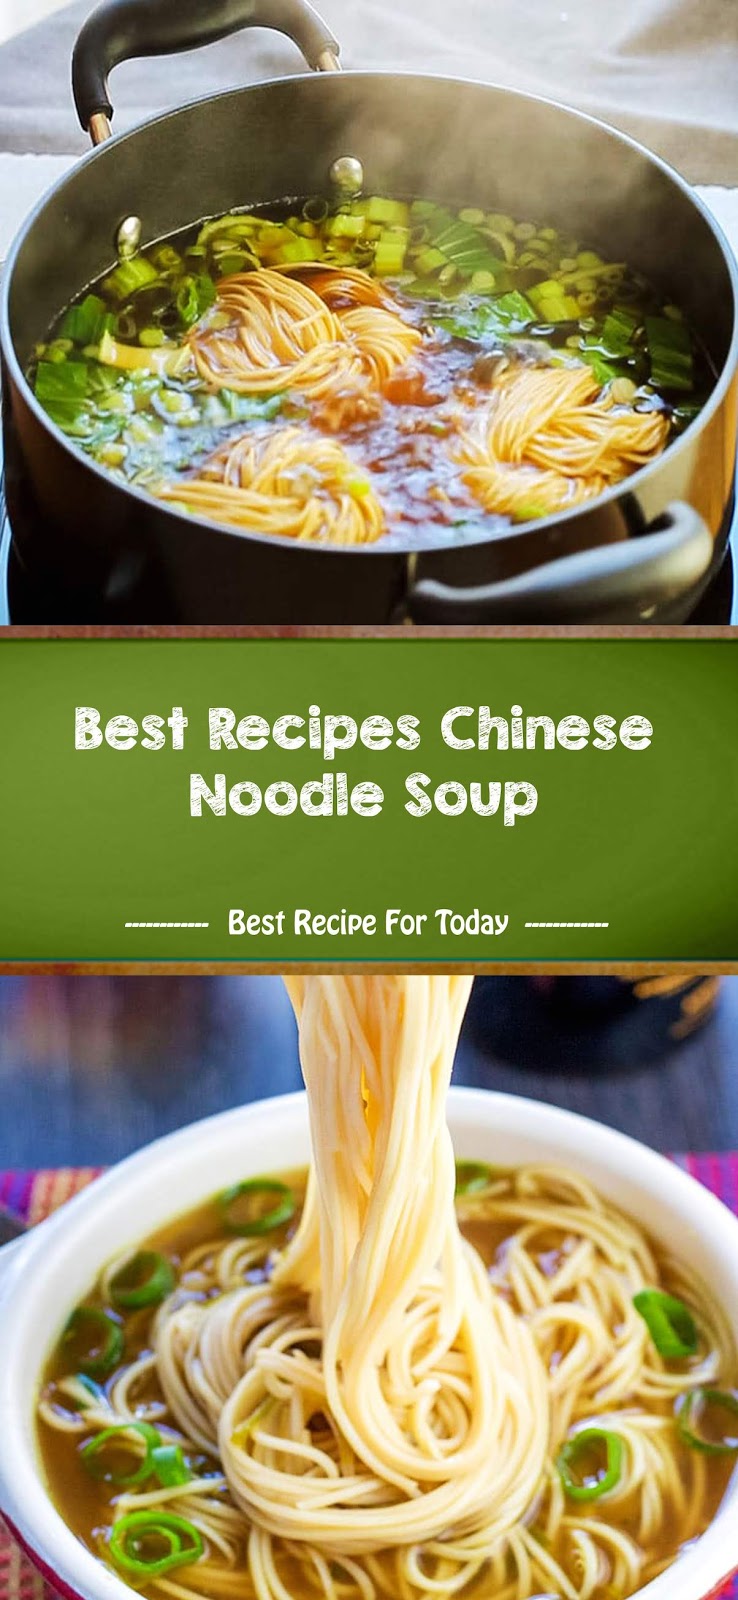 Best Recipes Chinese Noodle Soup | Healthyrecipes-04